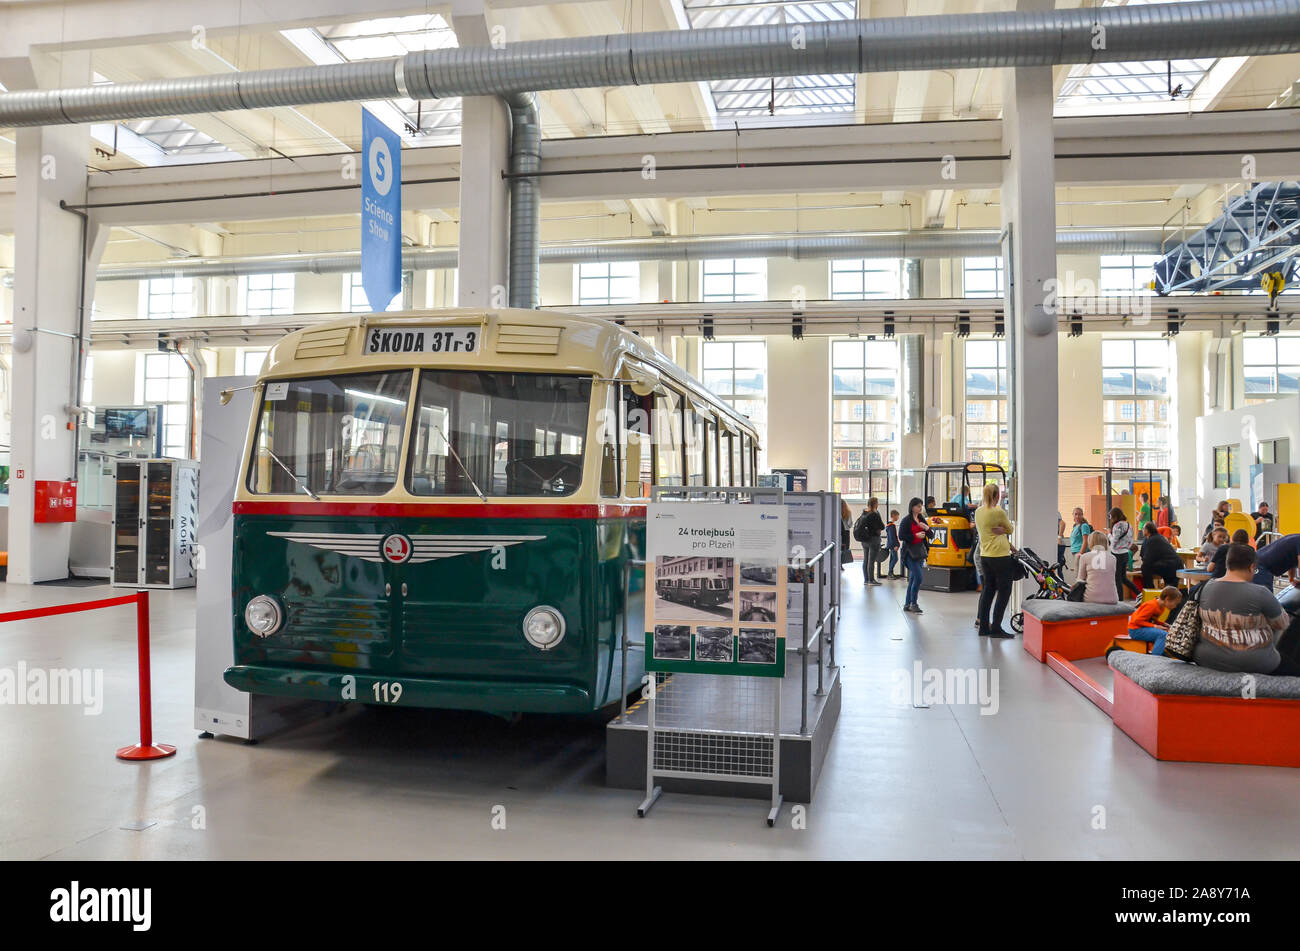 Plzen, Czech Republic - Oct 28, 2019: Interior exhibition in the Techmania Science Center. Old trolleybus as one of the exhibits. Center explaining scientific principles to children by games. Stock Photo